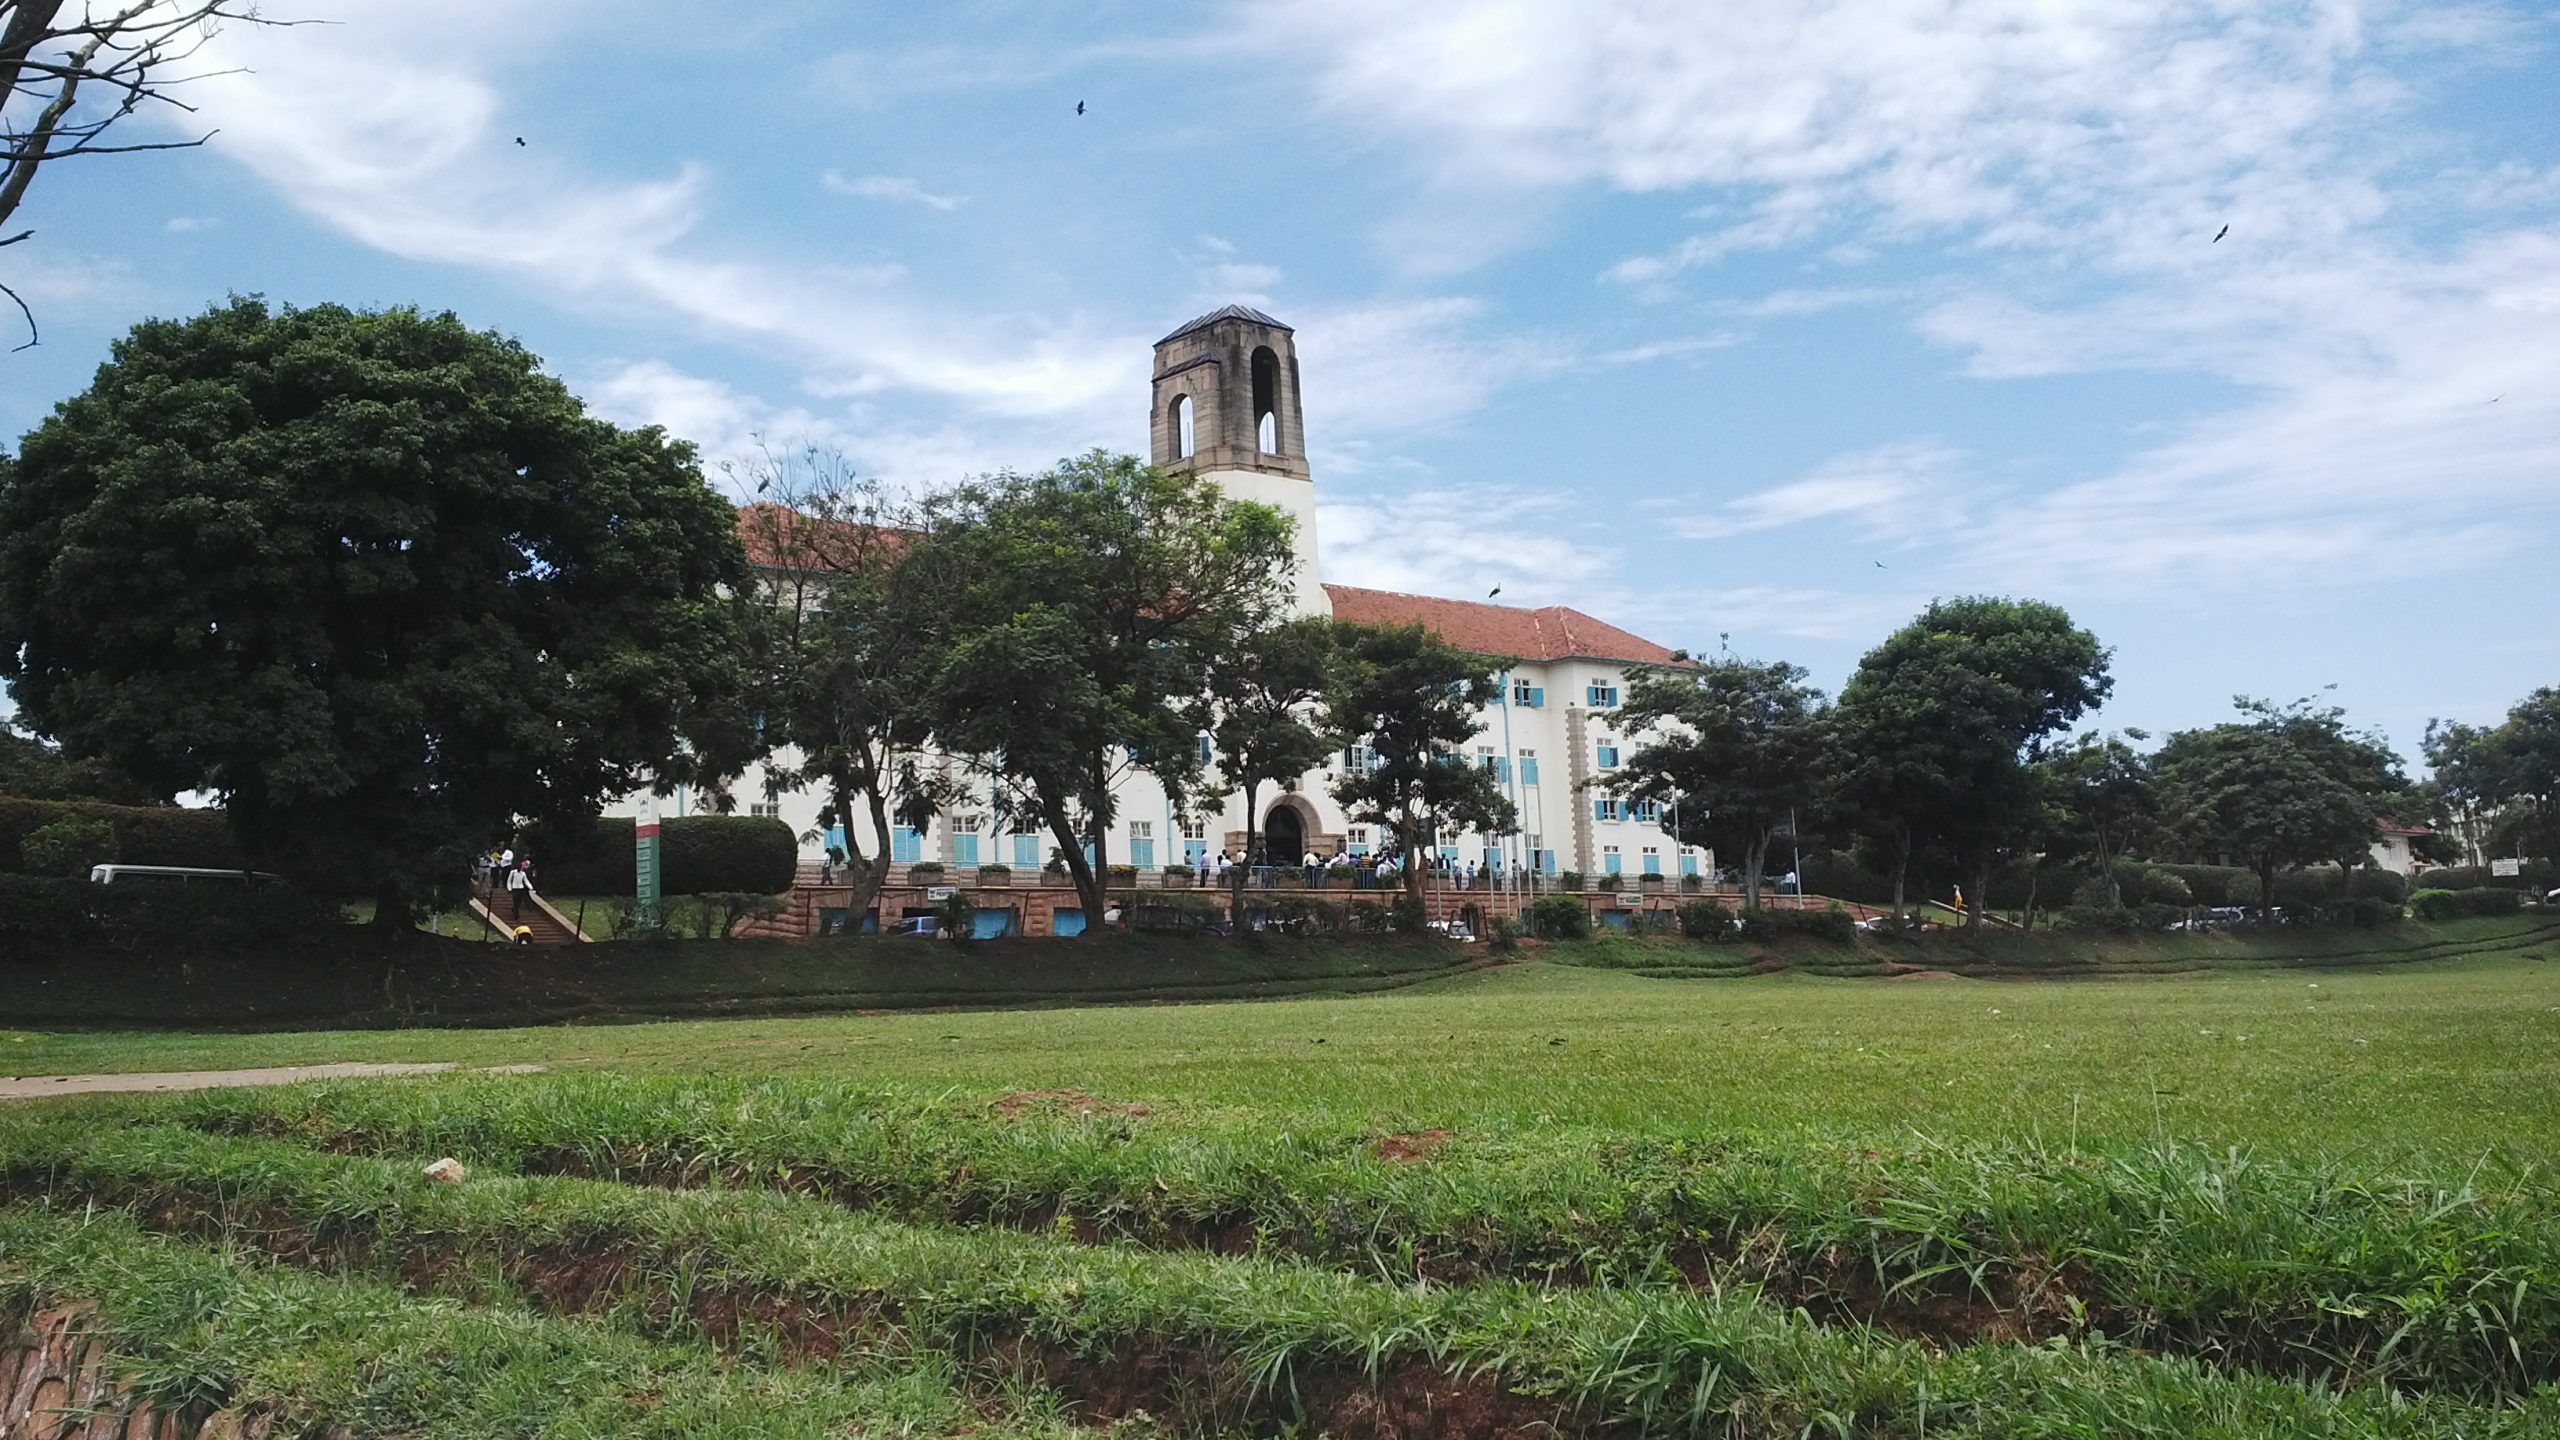 Makerere University, Main Building in the background.